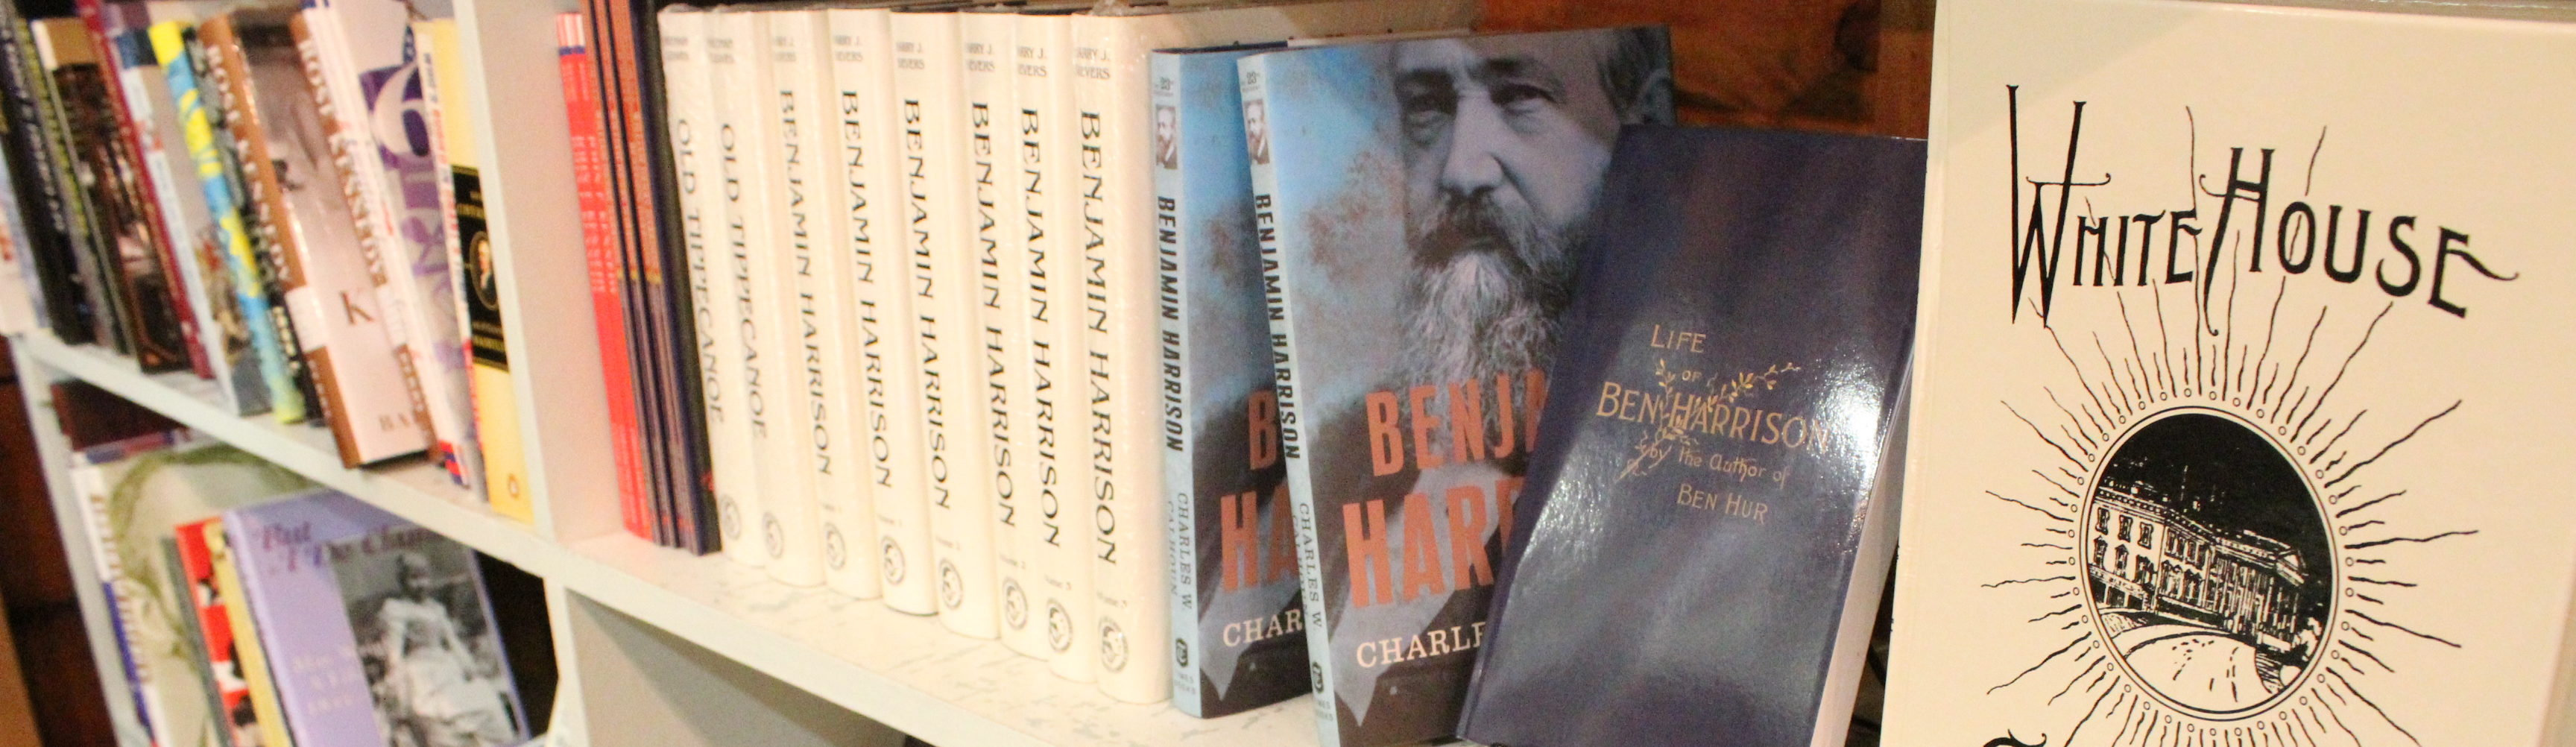 A bookshelf lined with many of the books sold at the presidential site gift shop. Featured in the image is the White House Cookbook the life of Benjamin Harrison, and several other books about the president.